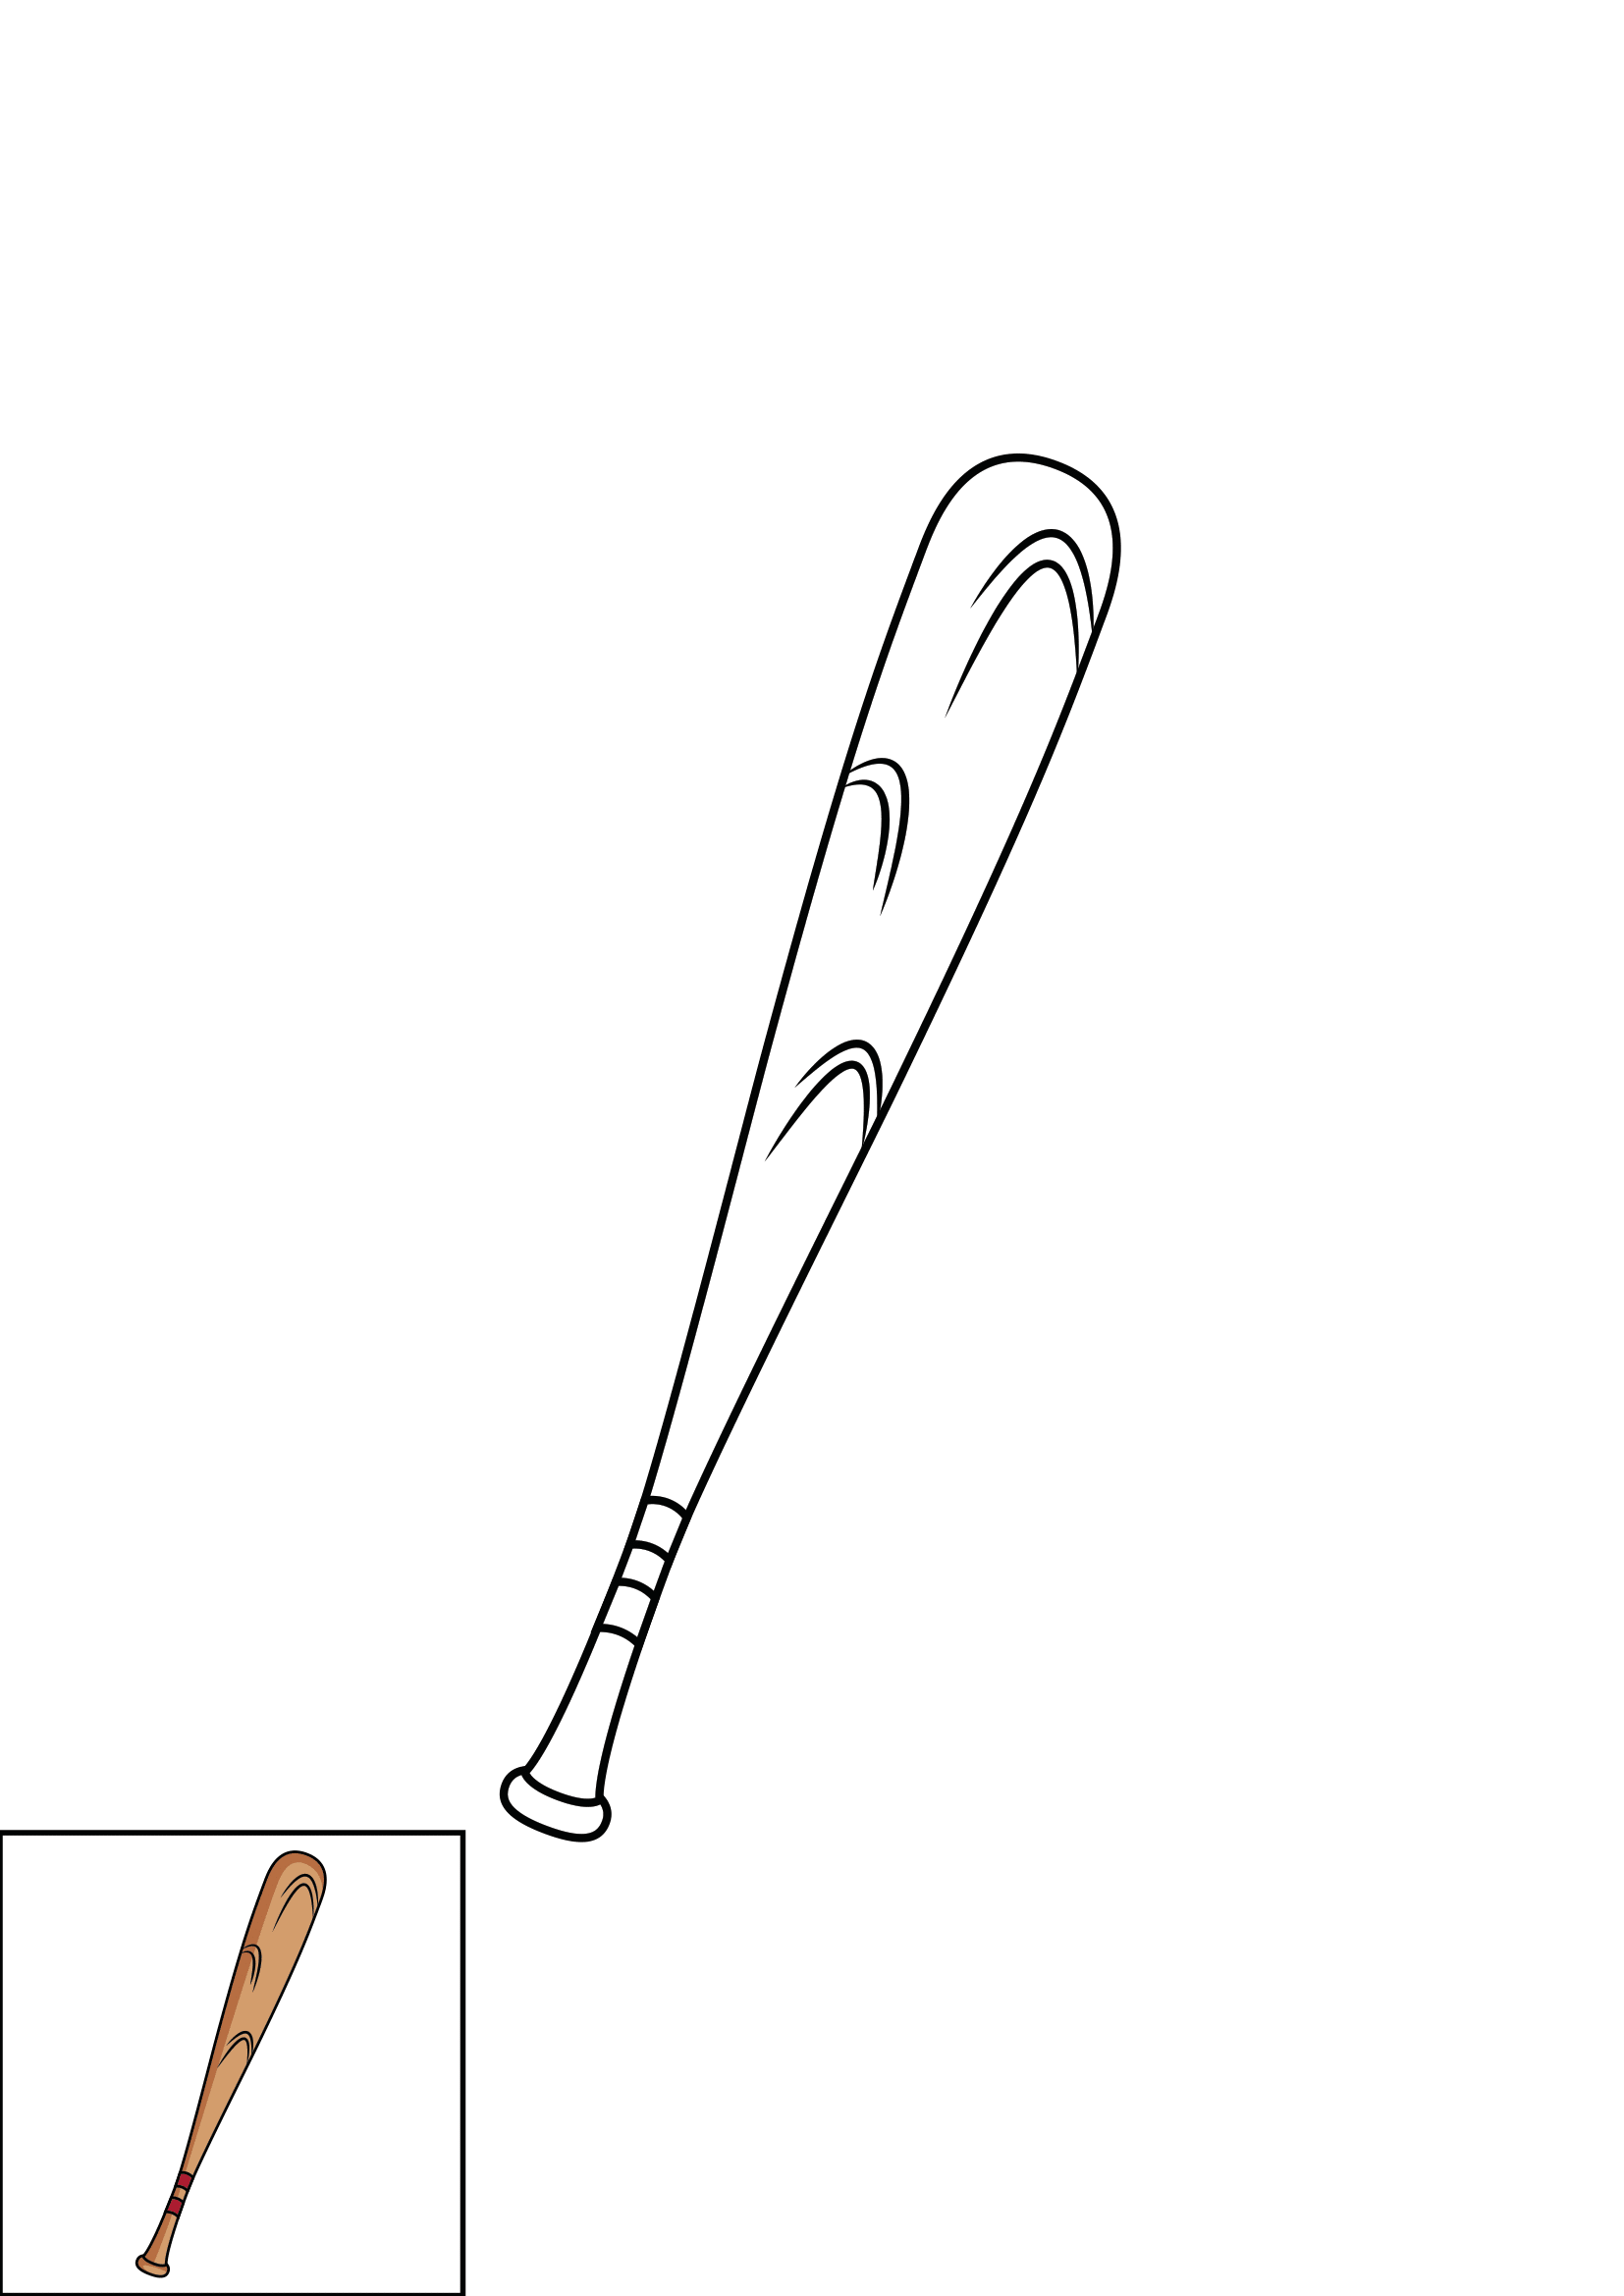 How to Draw A Baseball Bat Step by Step Printable Color